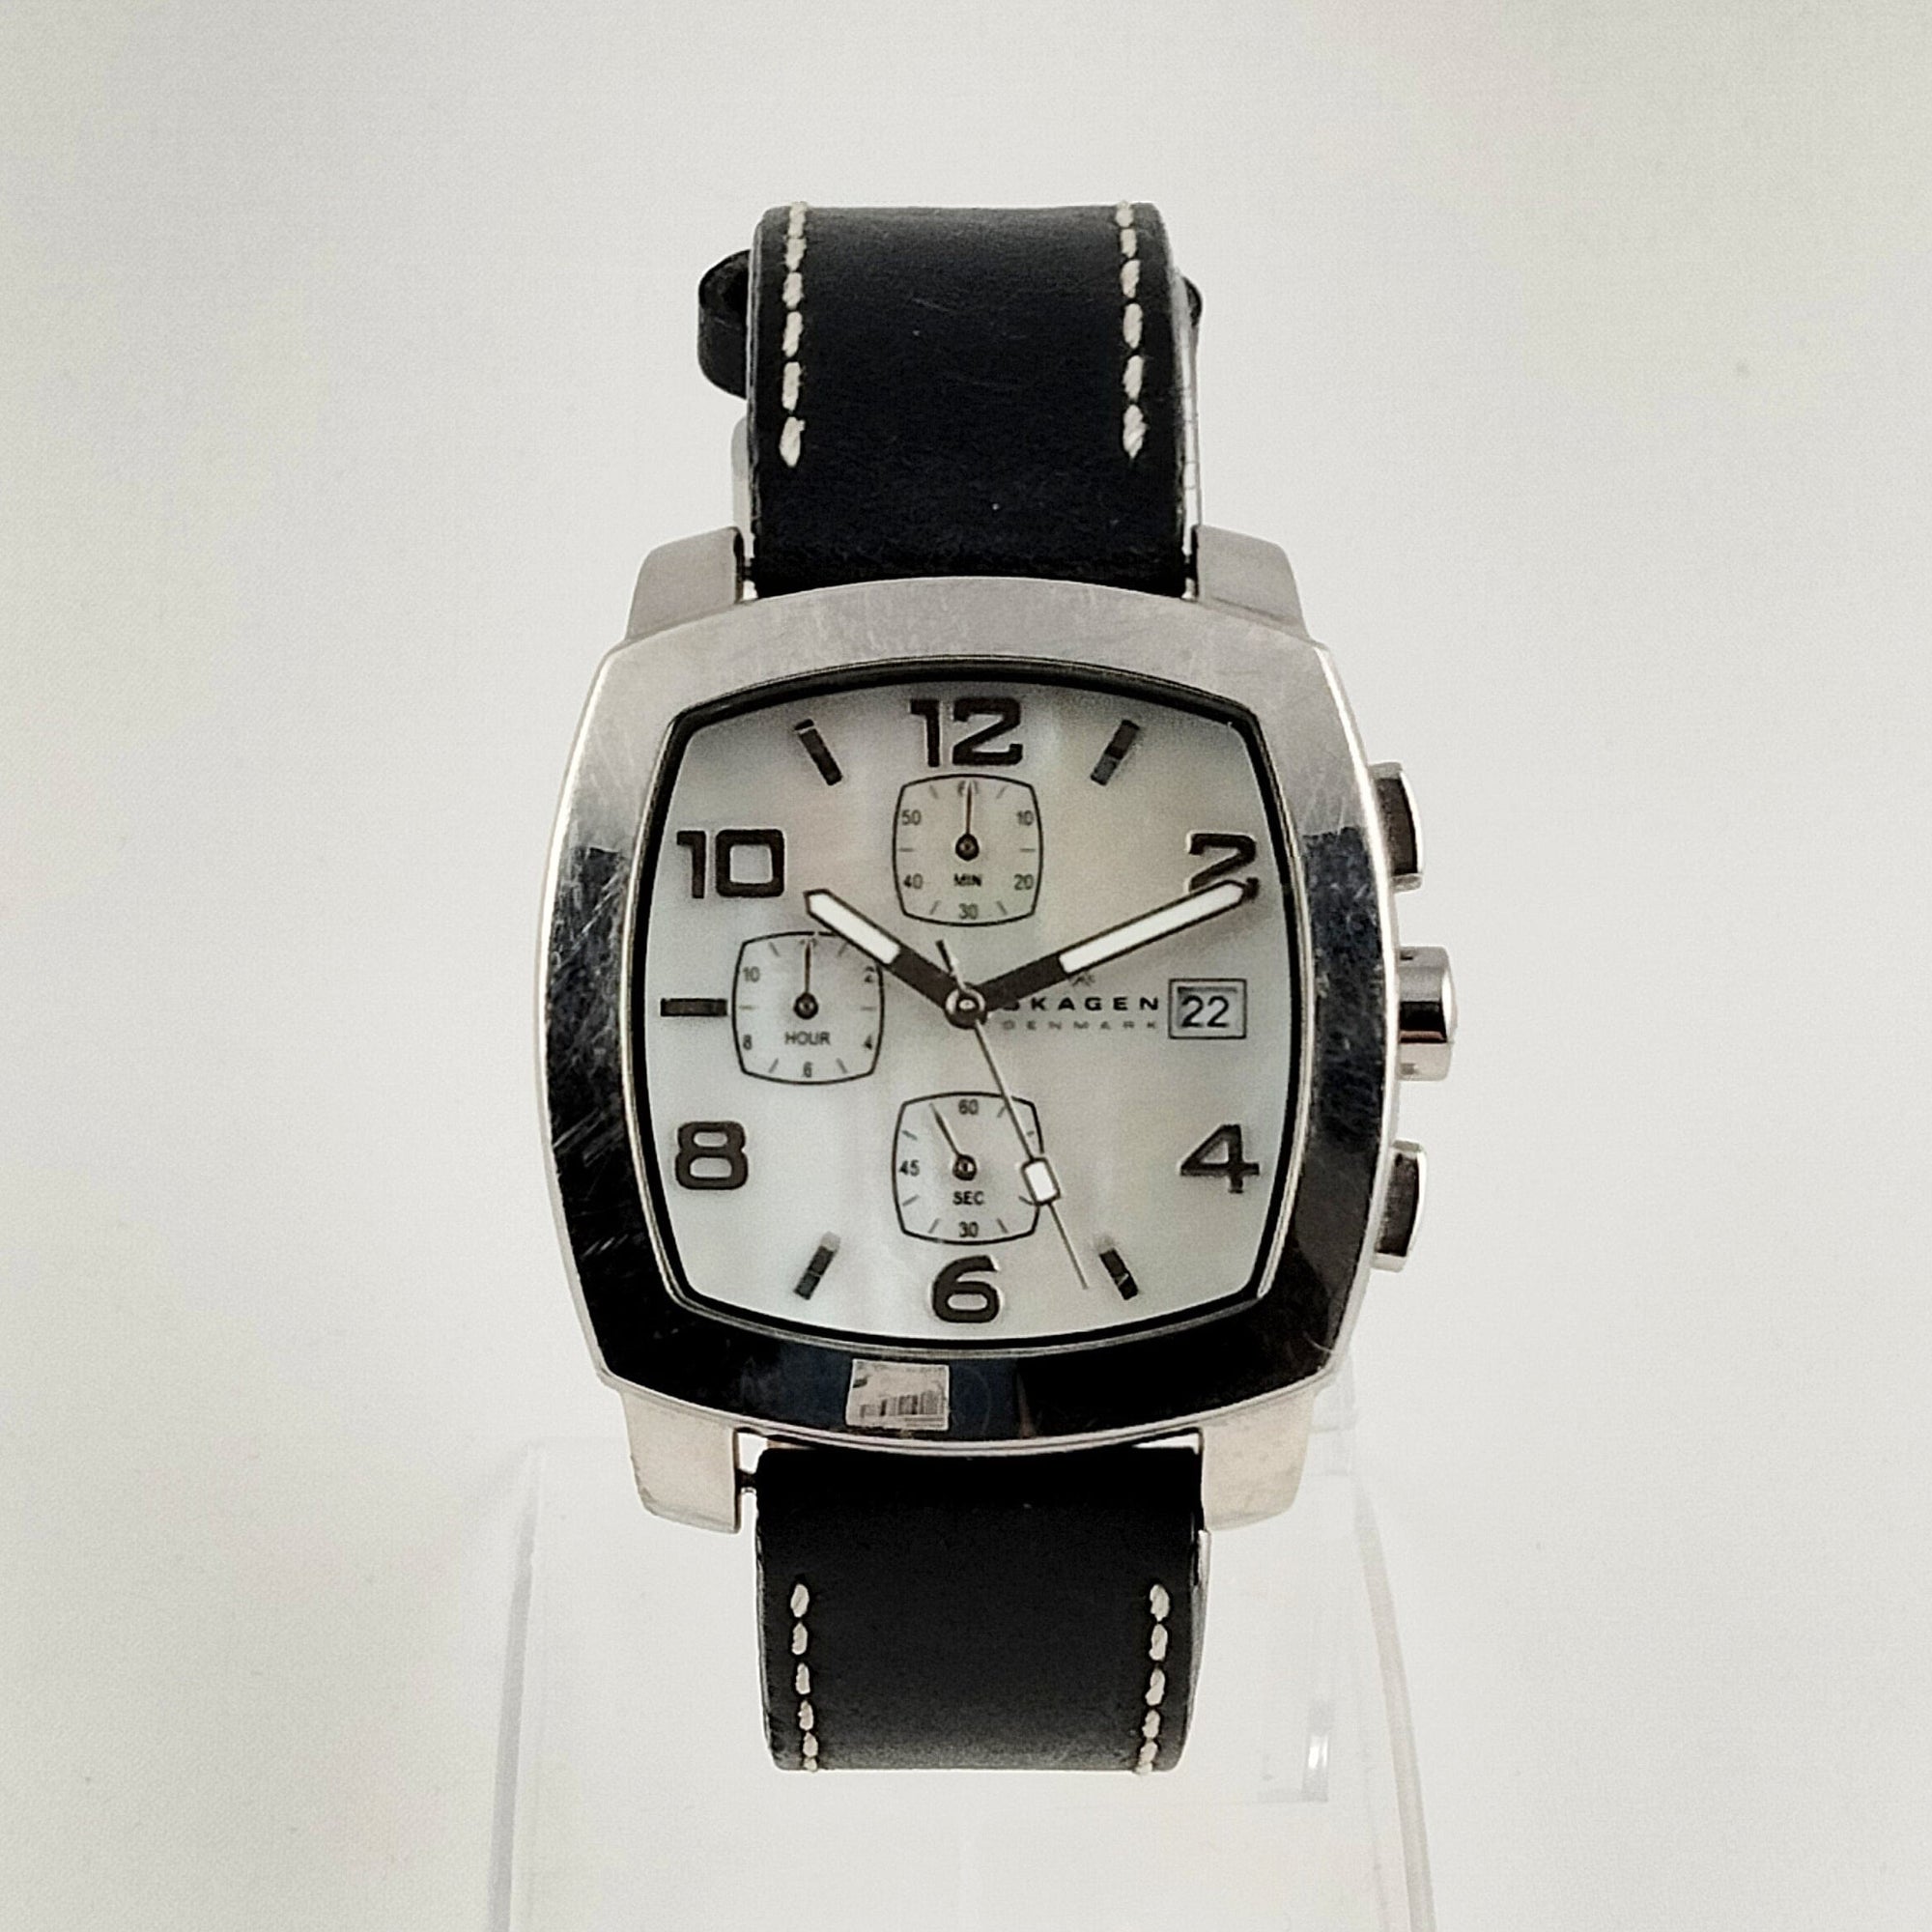 I Like Mikes Mid Century Modern Watches Skagen Men's Stainless Steel Square Chronograph Watch, Mother of Pearl Dial, Black Genuine Leather Strap